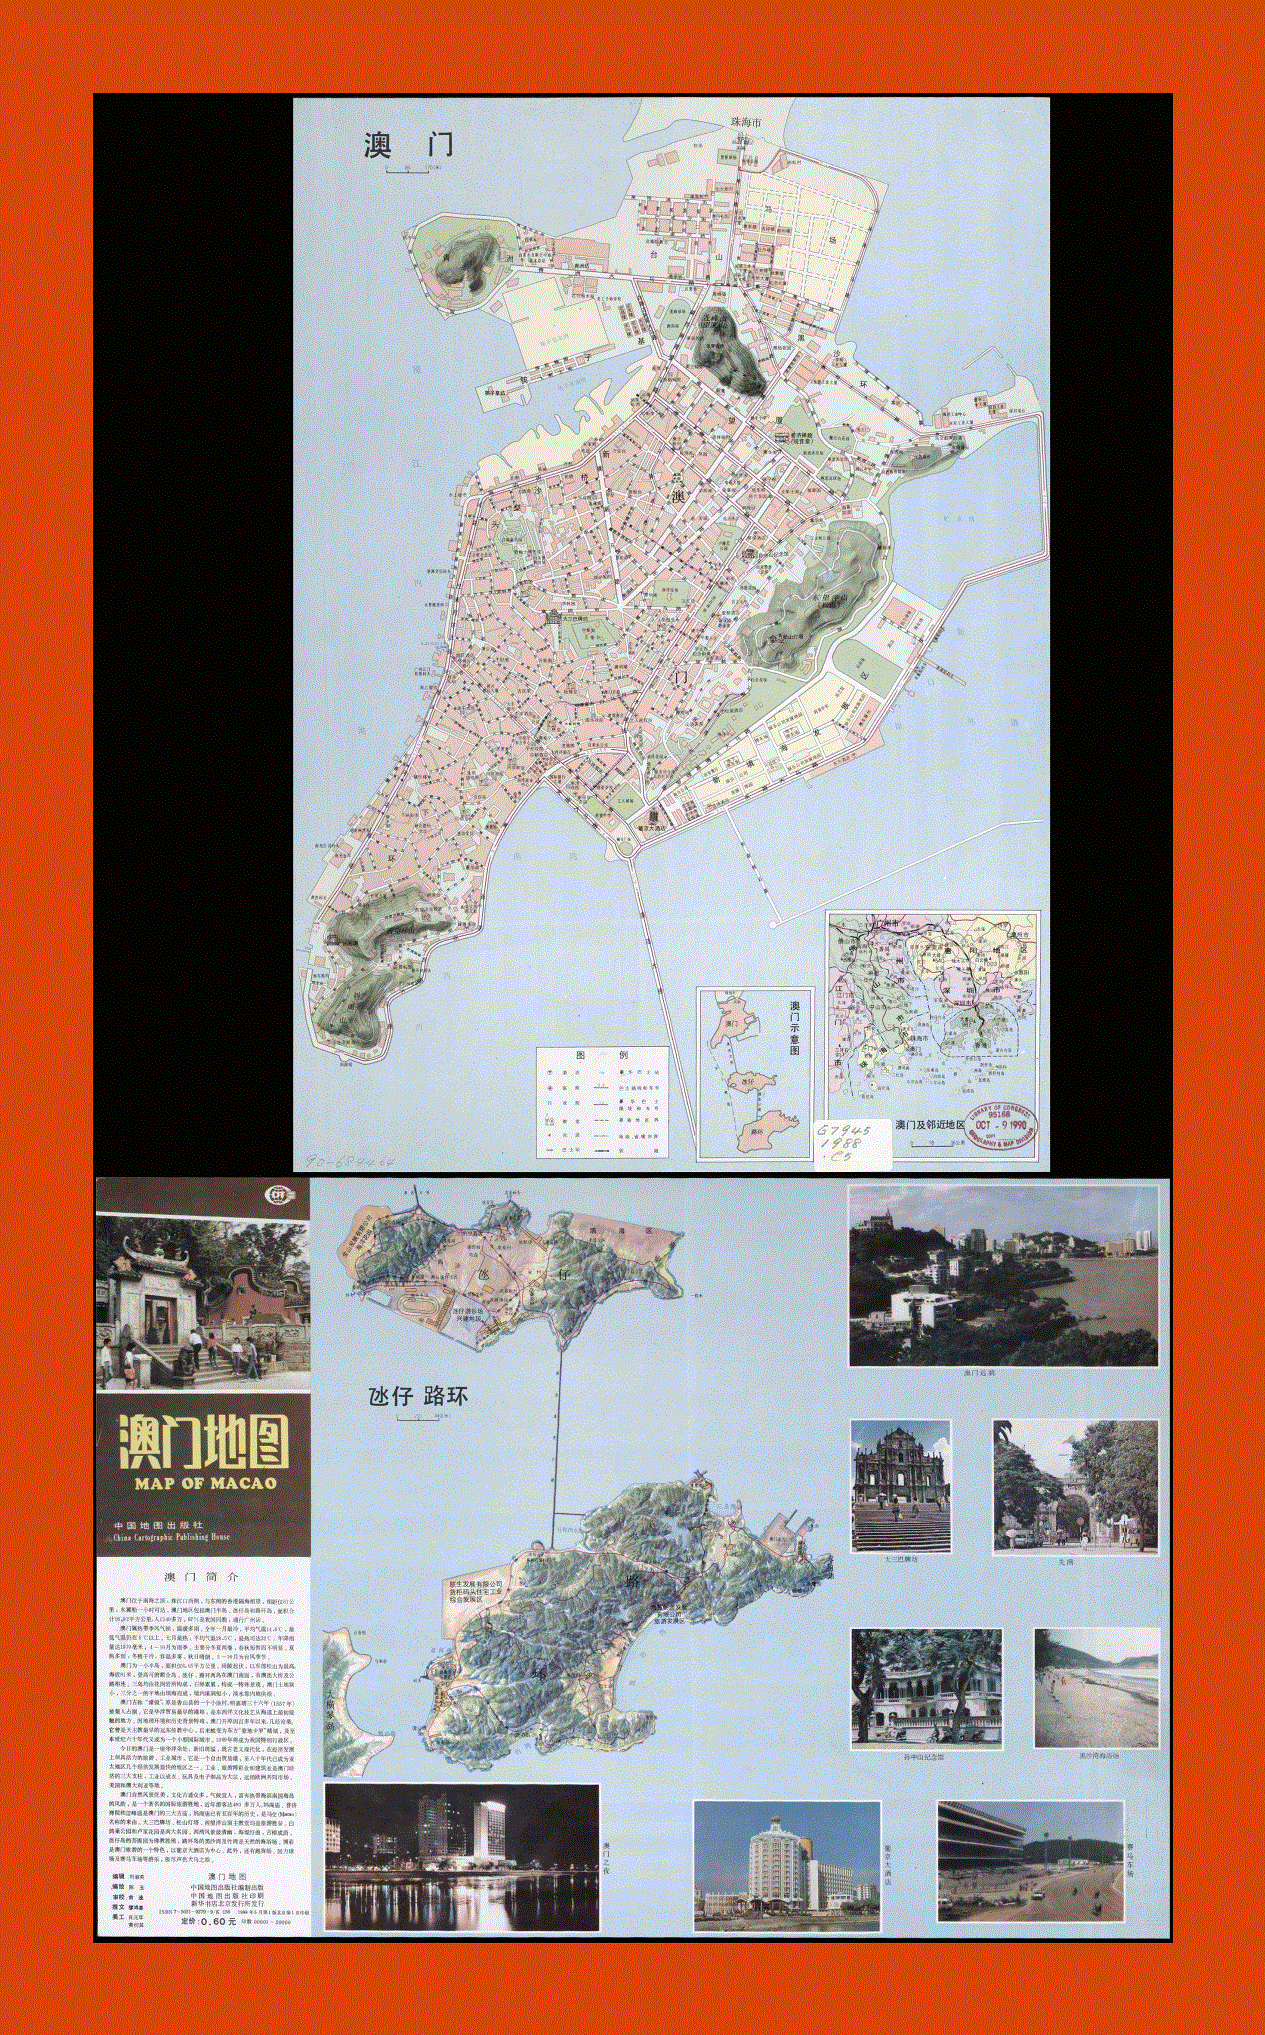 Tourist map of Macau in chinese - 1988